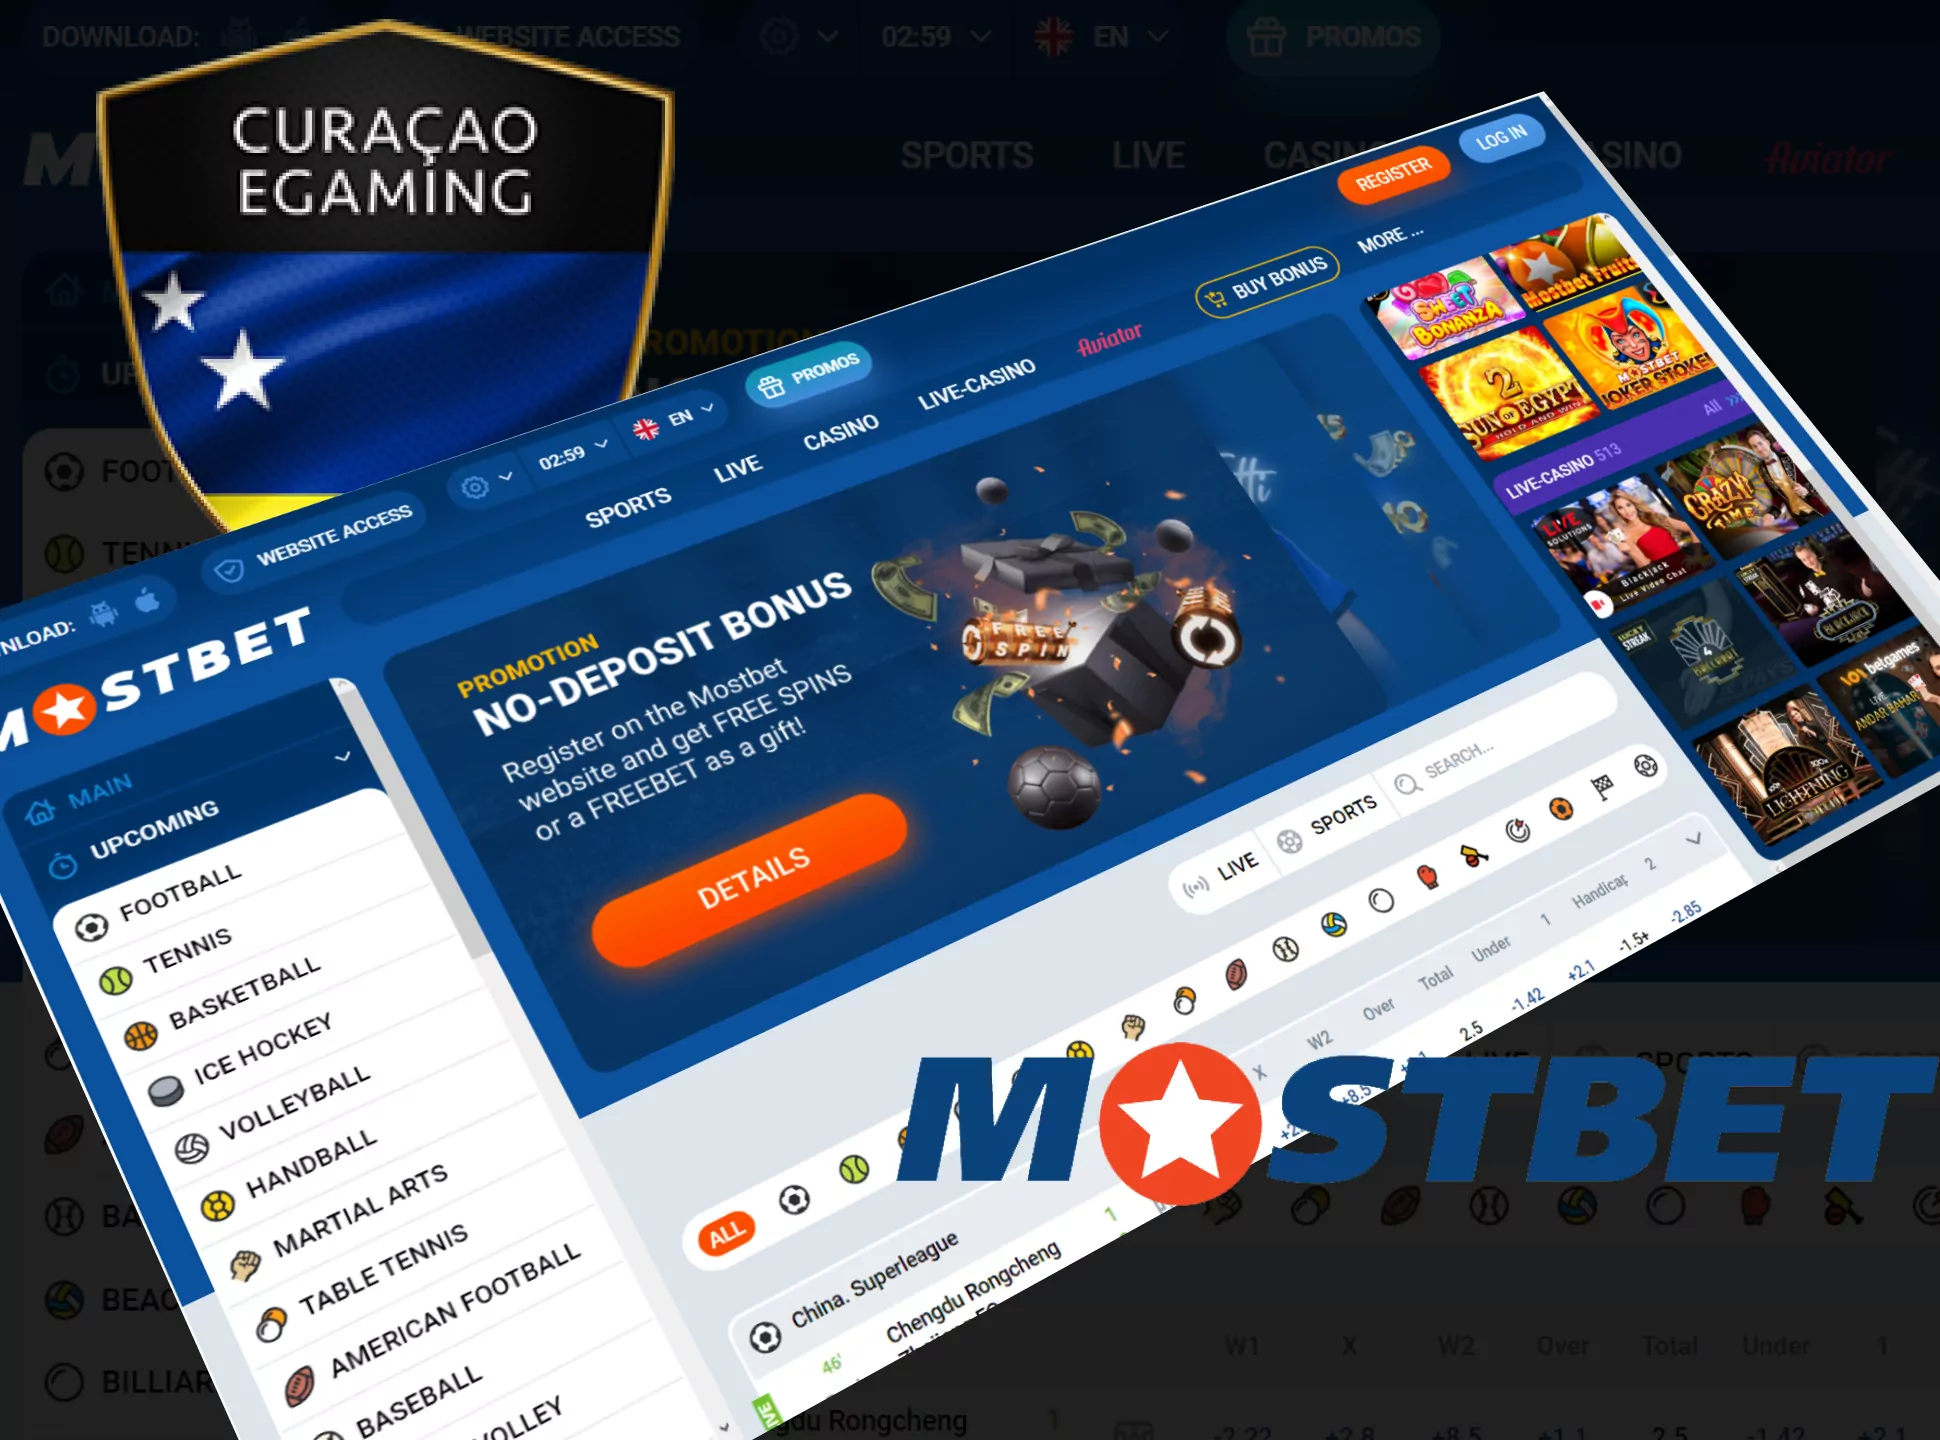 Mostbet Casino gives a lot of bonuses for new and regular players.